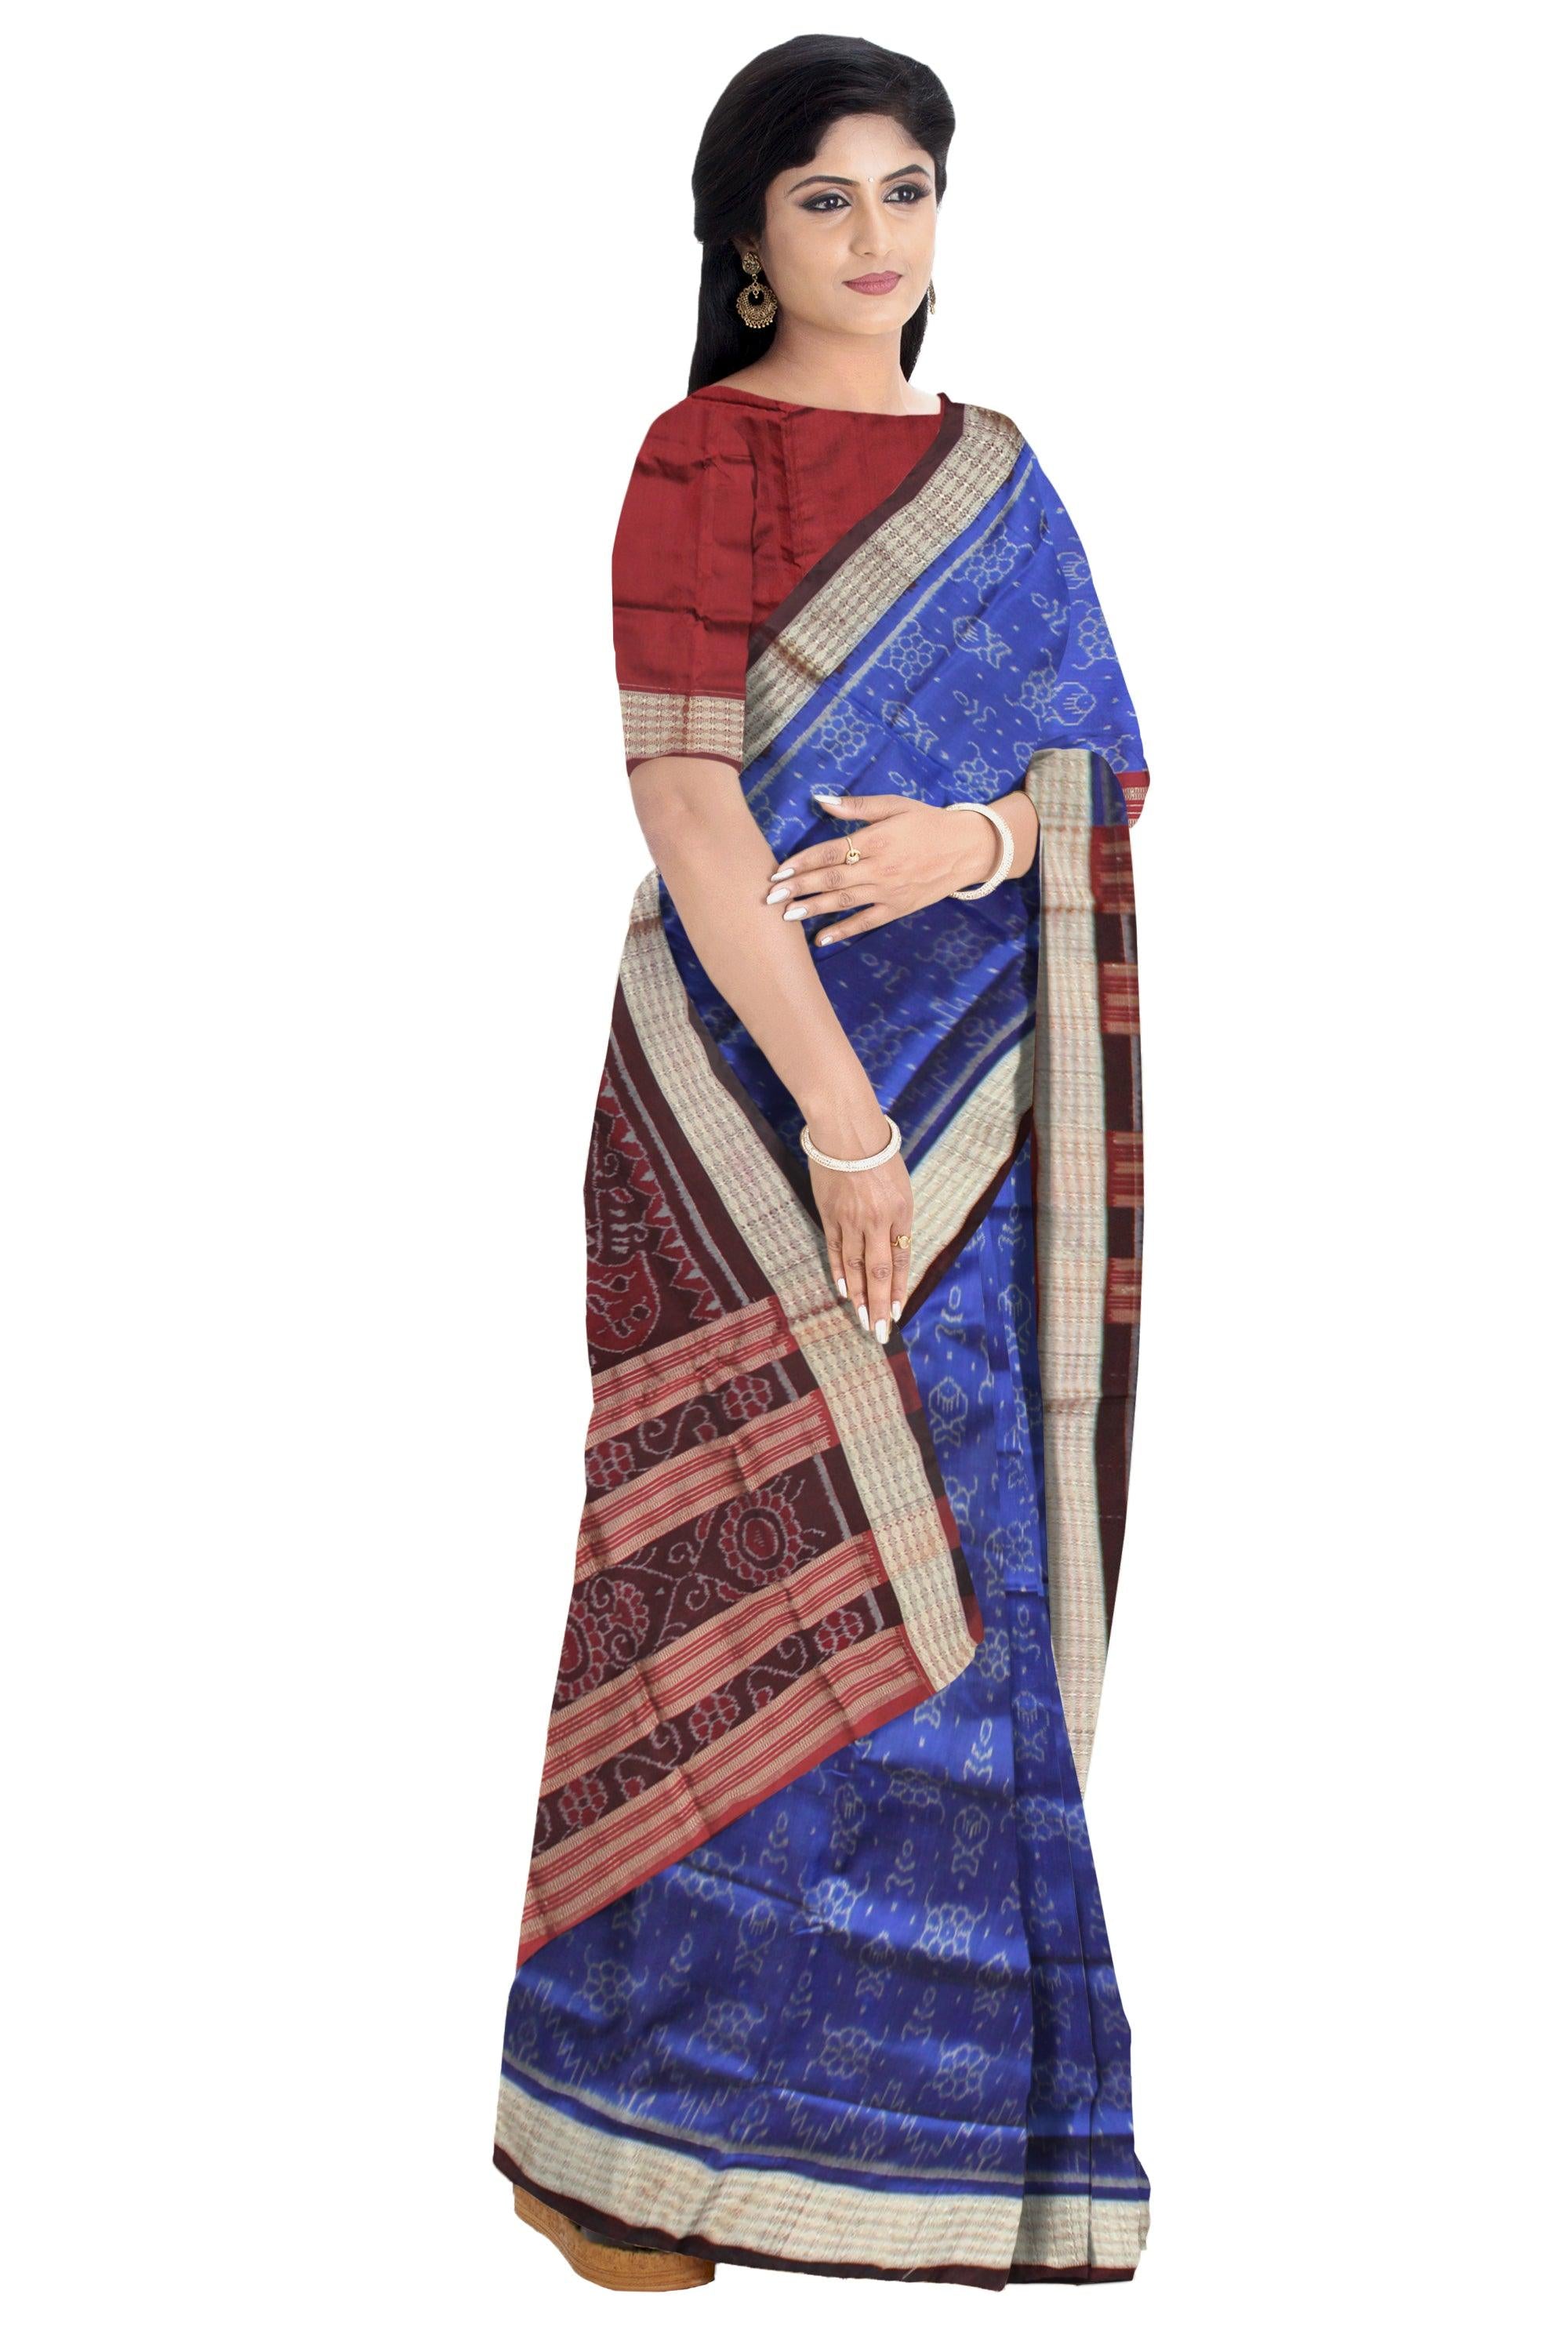 SMALL FISH AND FLOWER PATTERN PATA SAREE IS BLUE AND COFFEE COLOR BASE, COMES WITH MATCHING BLOUSE PIECE. - Koshali Arts & Crafts Enterprise